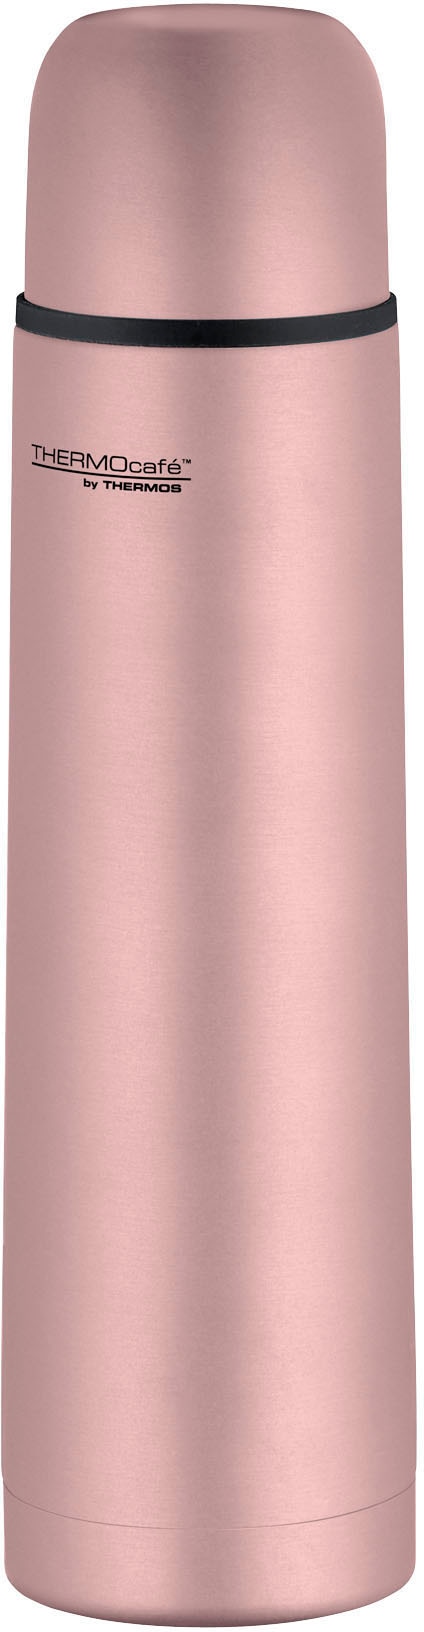 THERMOS Isolierflasche "Everyday"